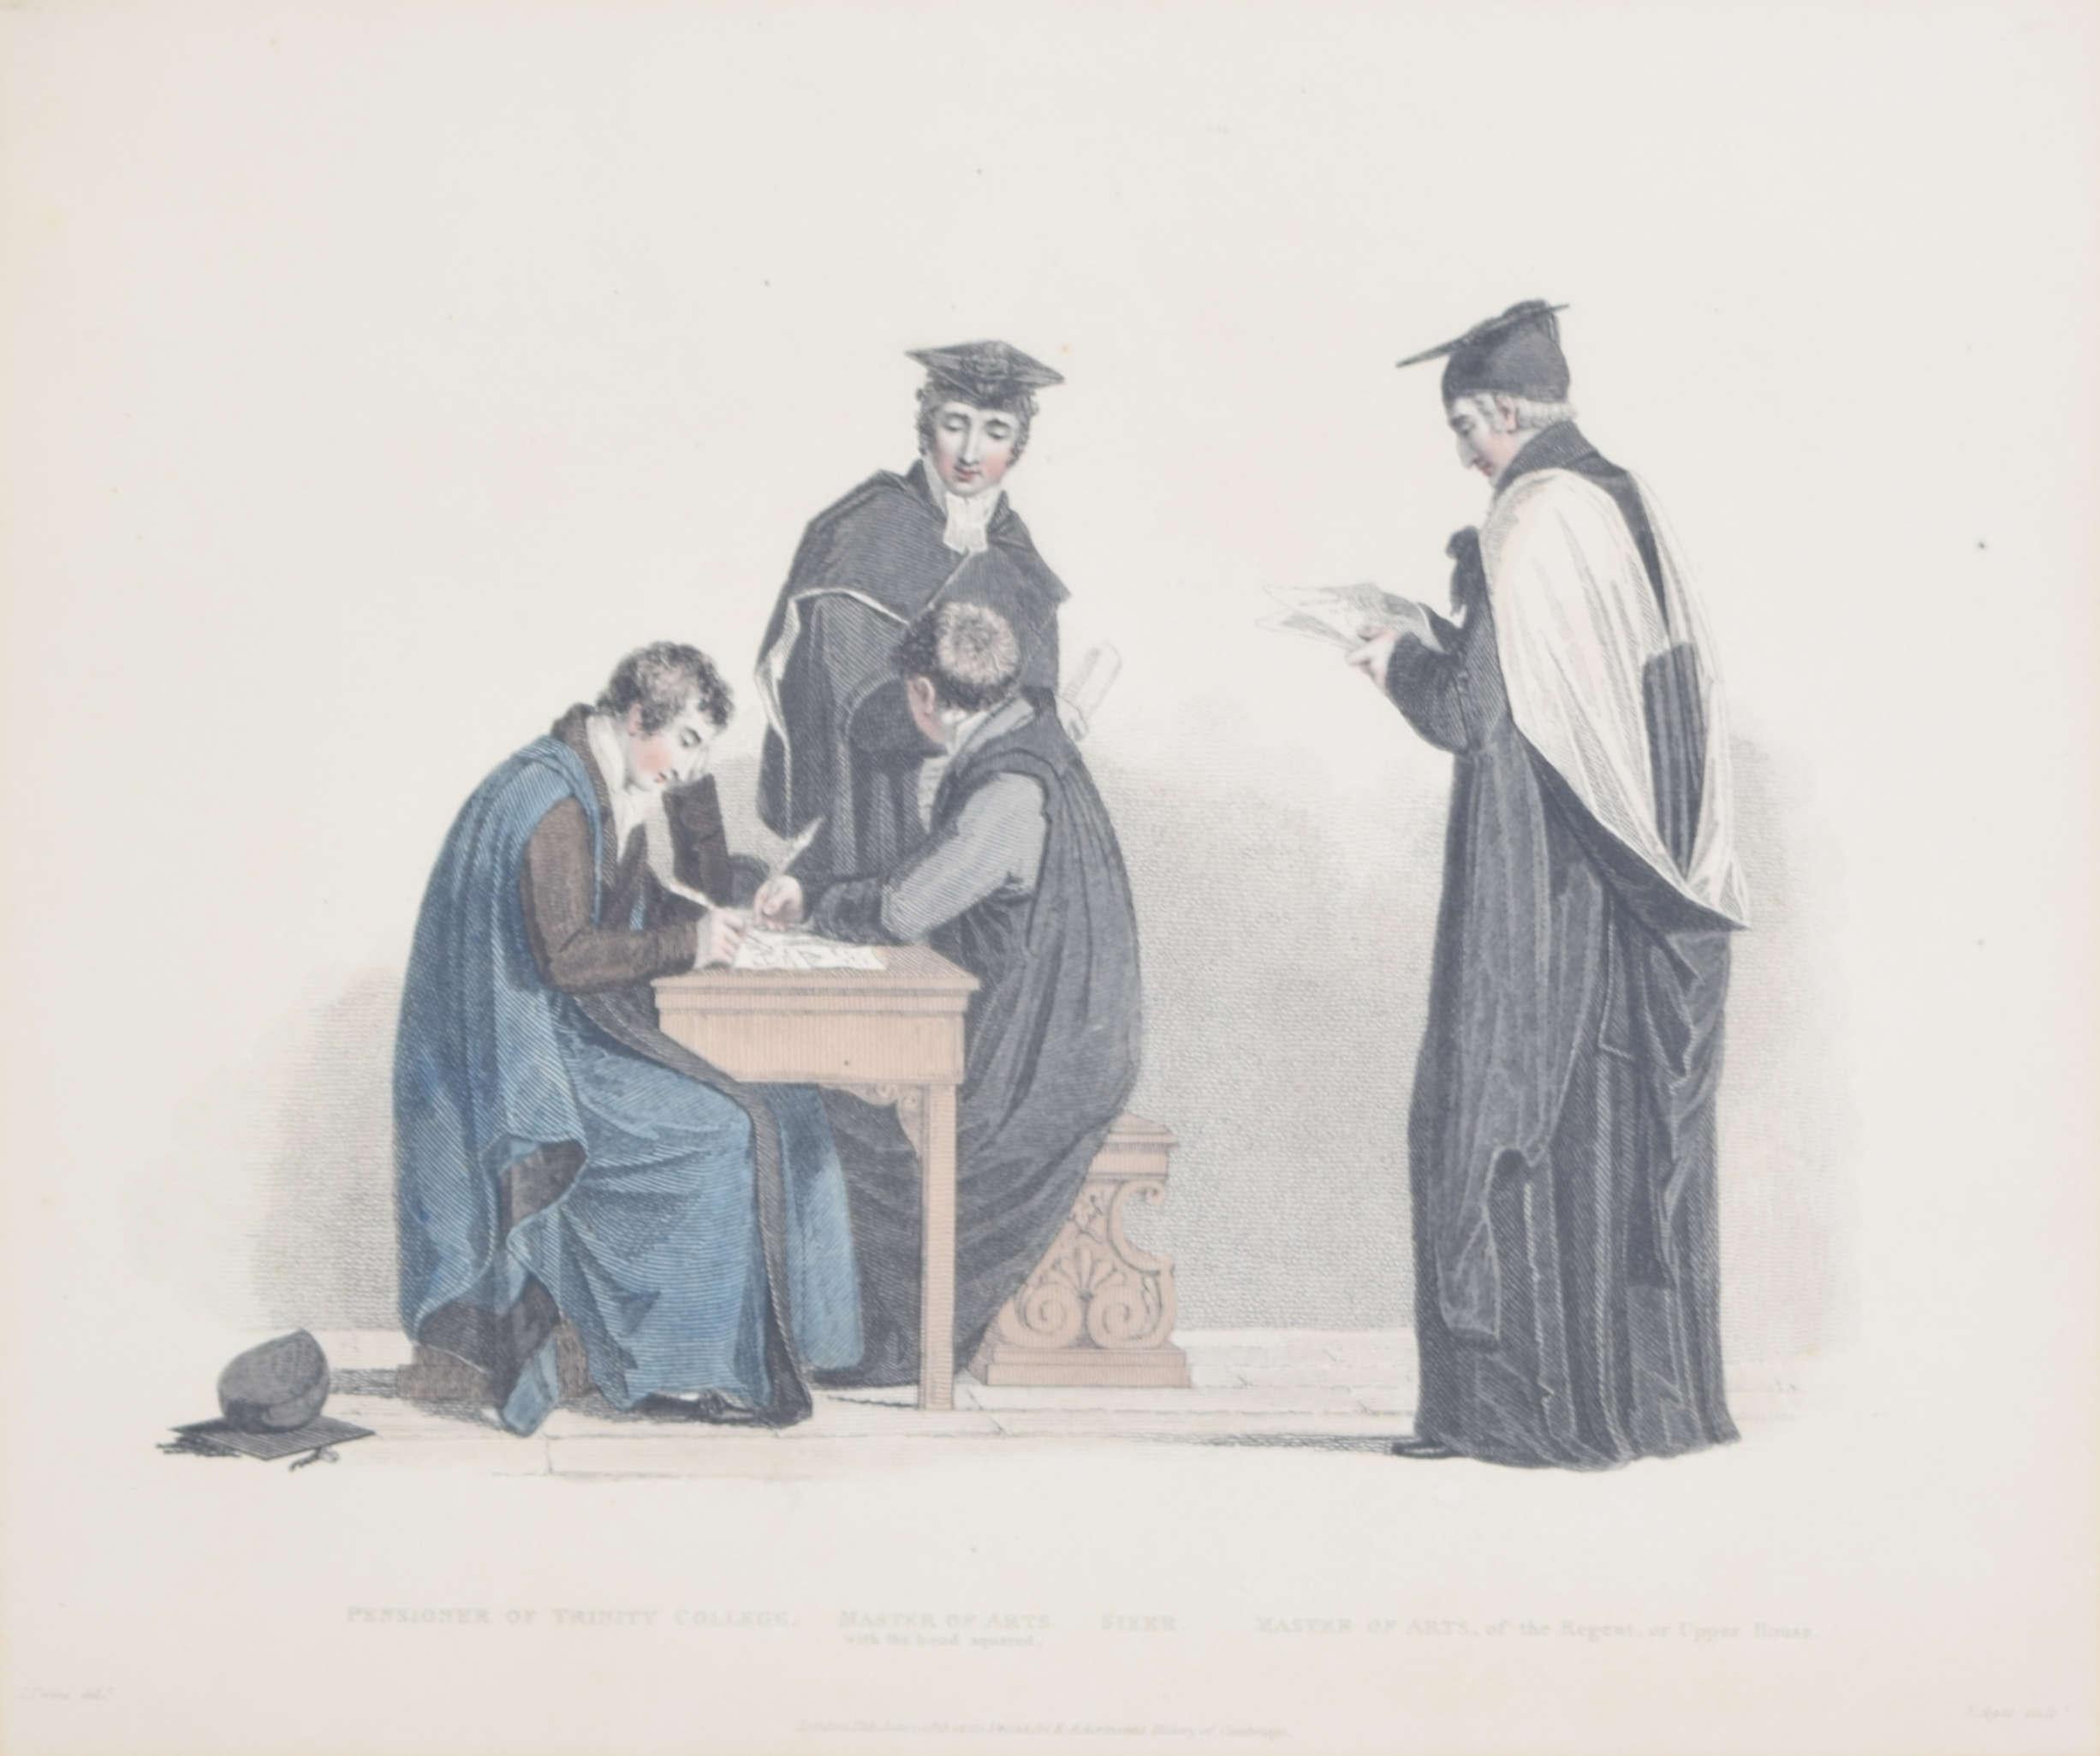 MA Masters of Arts and Trinity College, Cambridge member engraving by John Agar - Print by Rudolph Ackermann